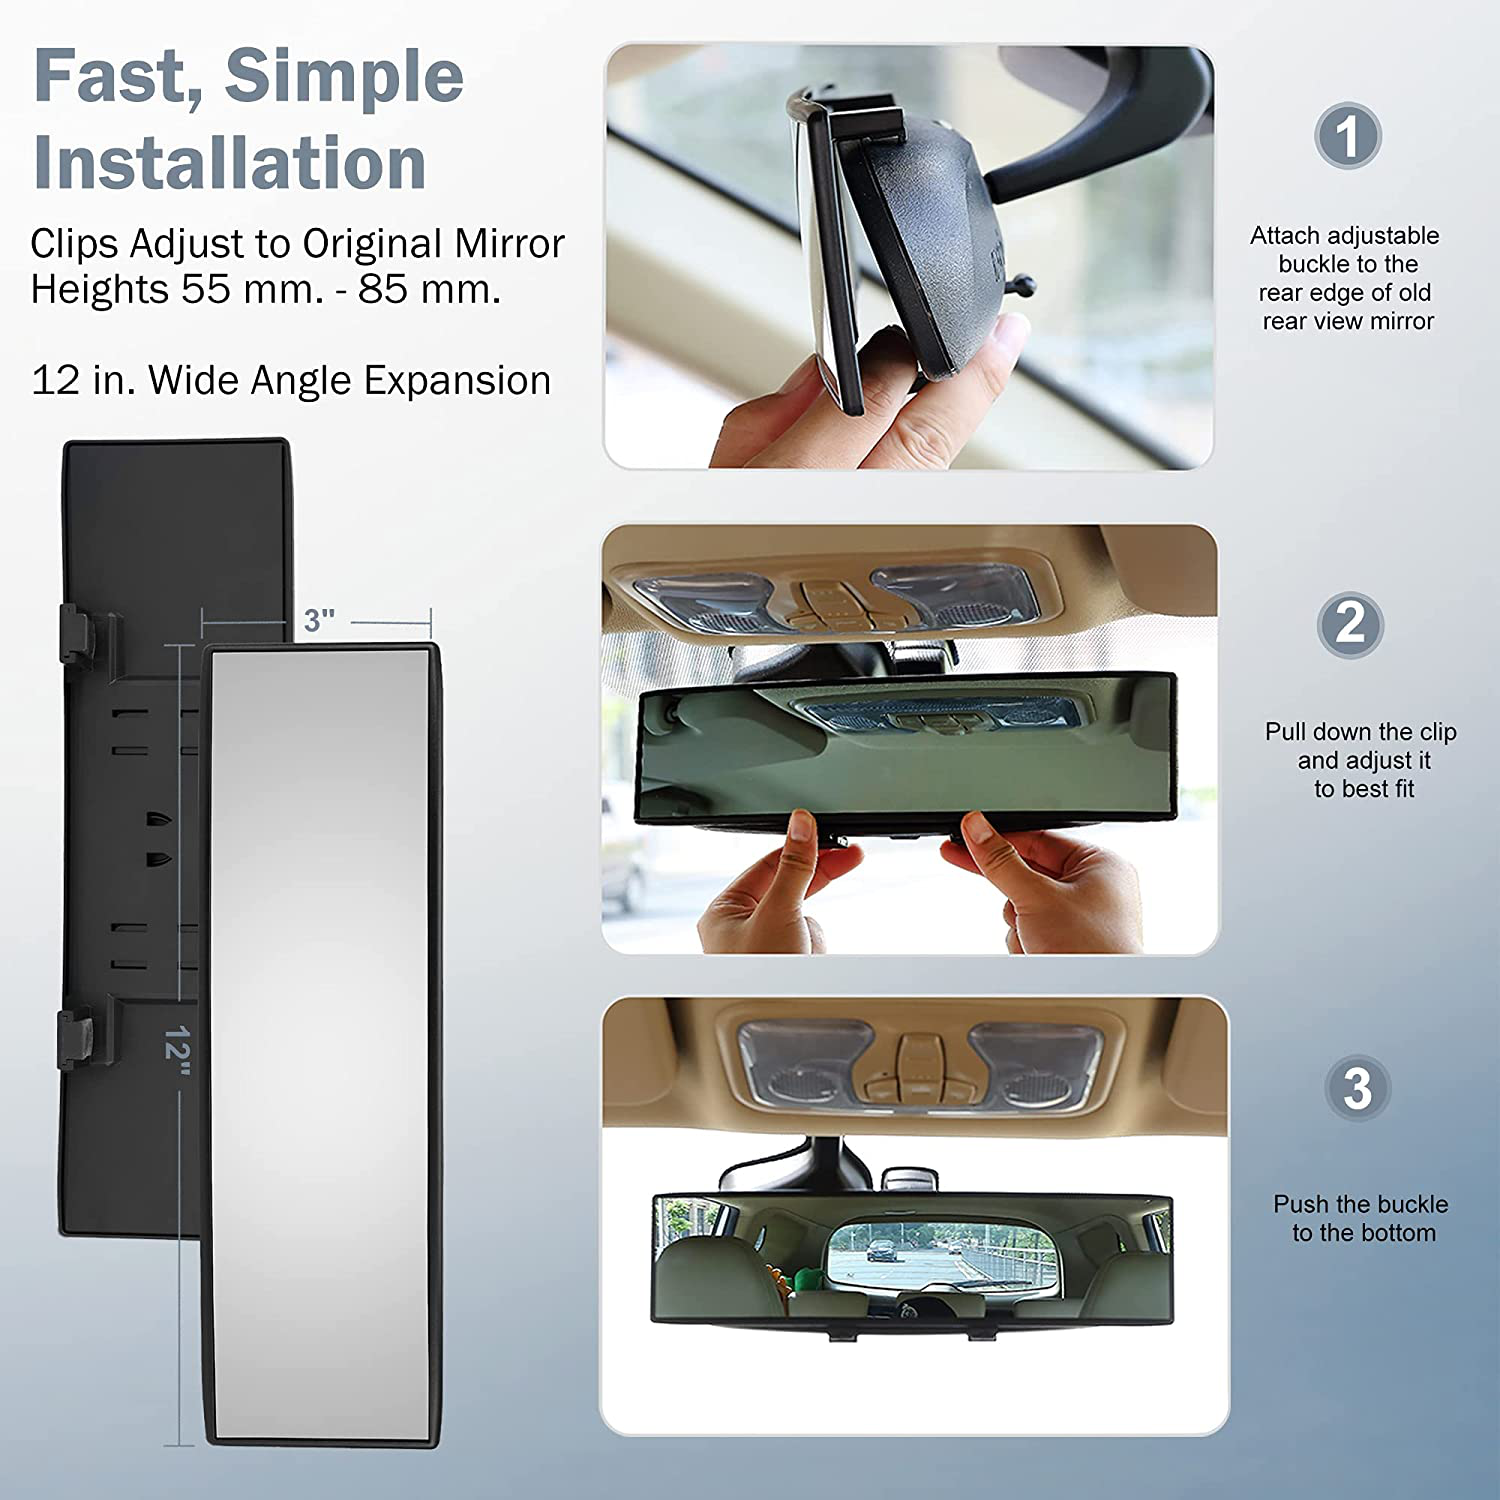 Verivue Mirrors Universal 12 Inch Interior Clip On Panoramic Rearview Mirror - Clear Tint - Wide Angle - For use in Car, SUV, Truck